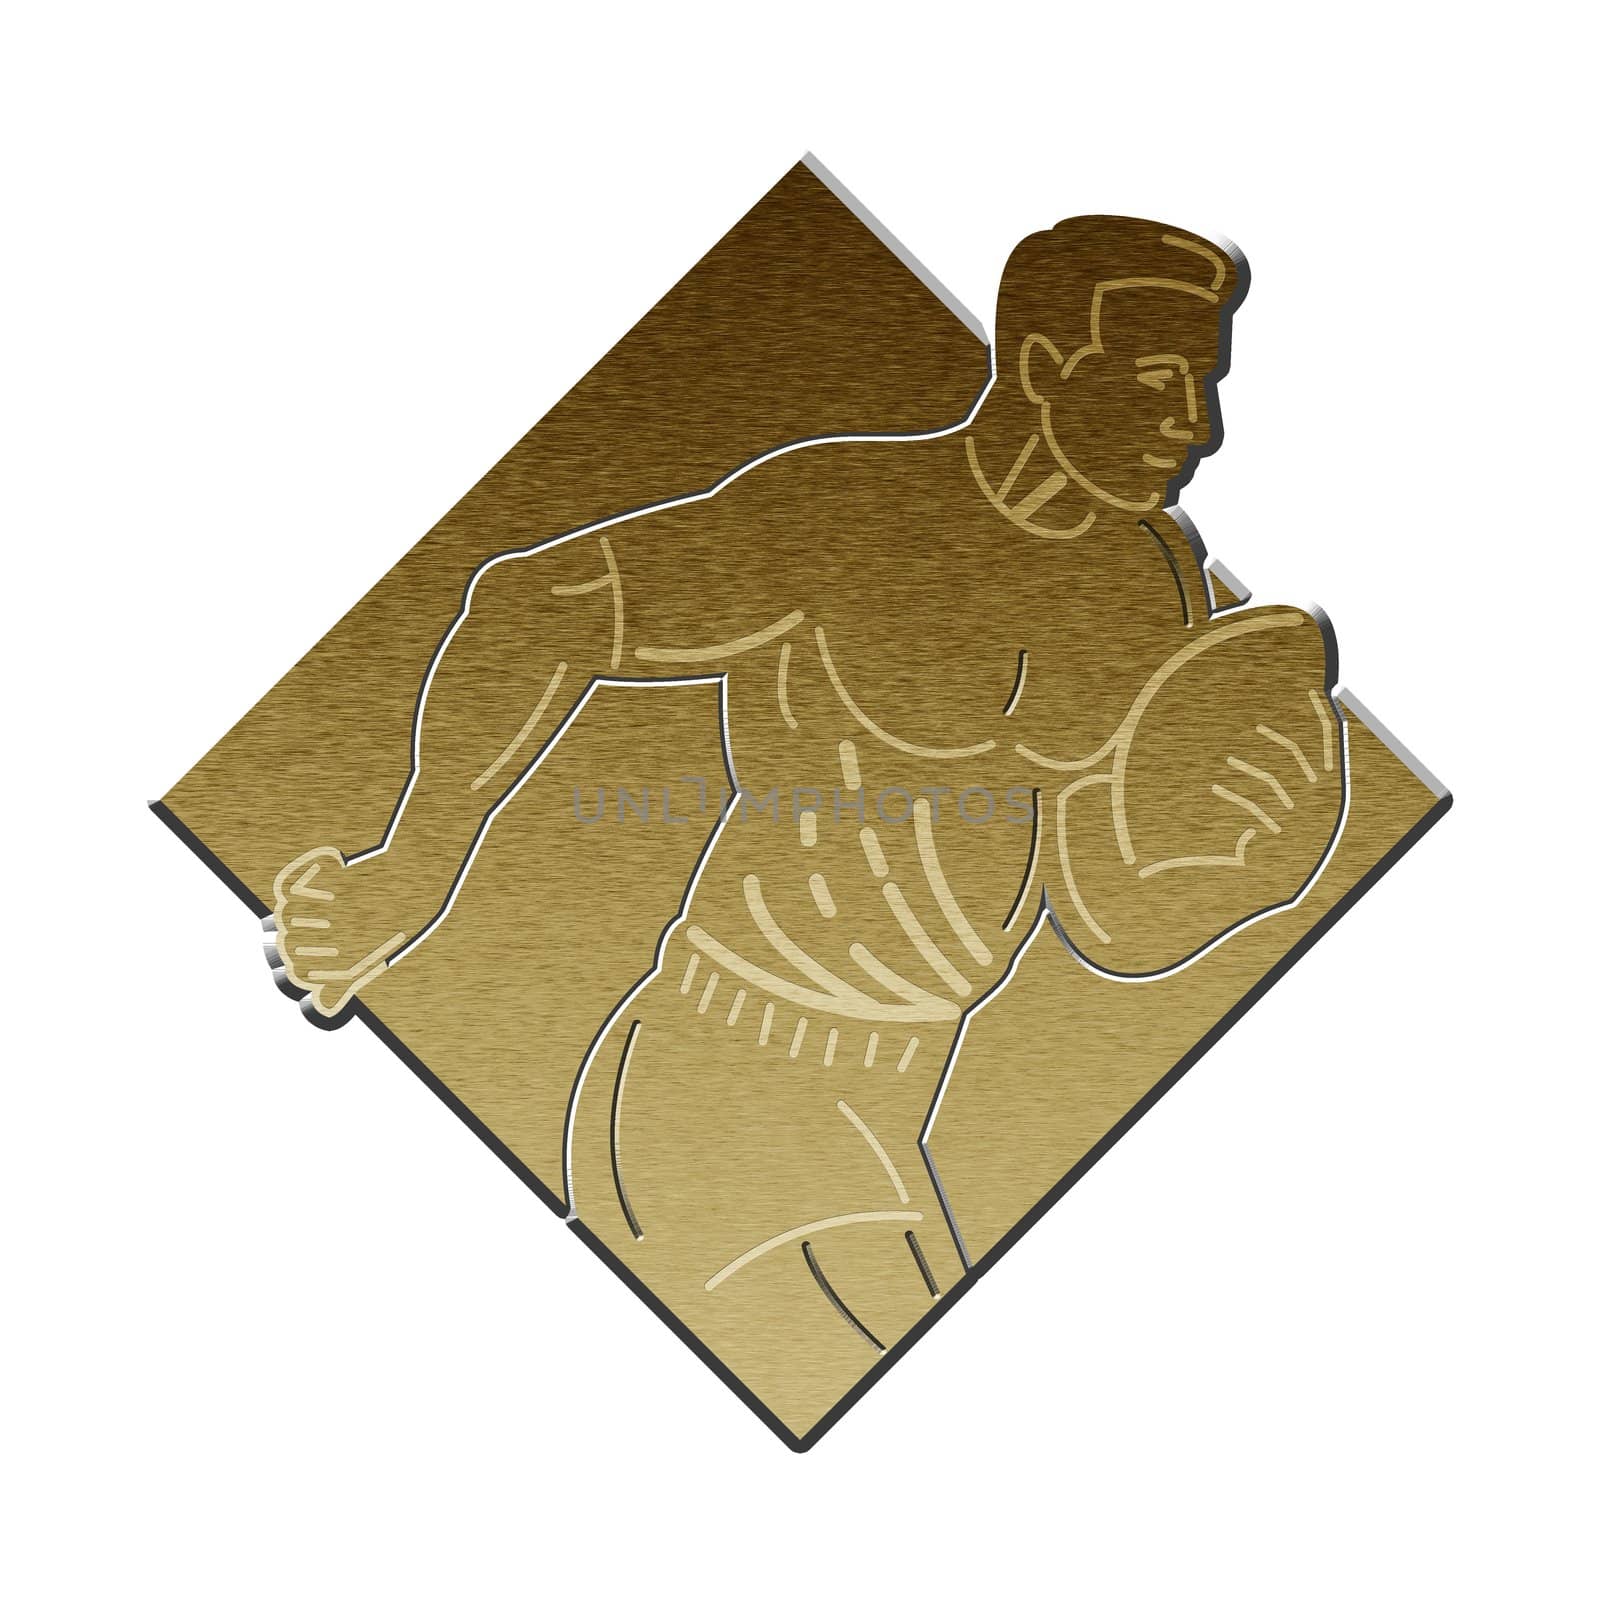 illustration of a rugby player running passing the ball on isolated background   done in metallic gold style.